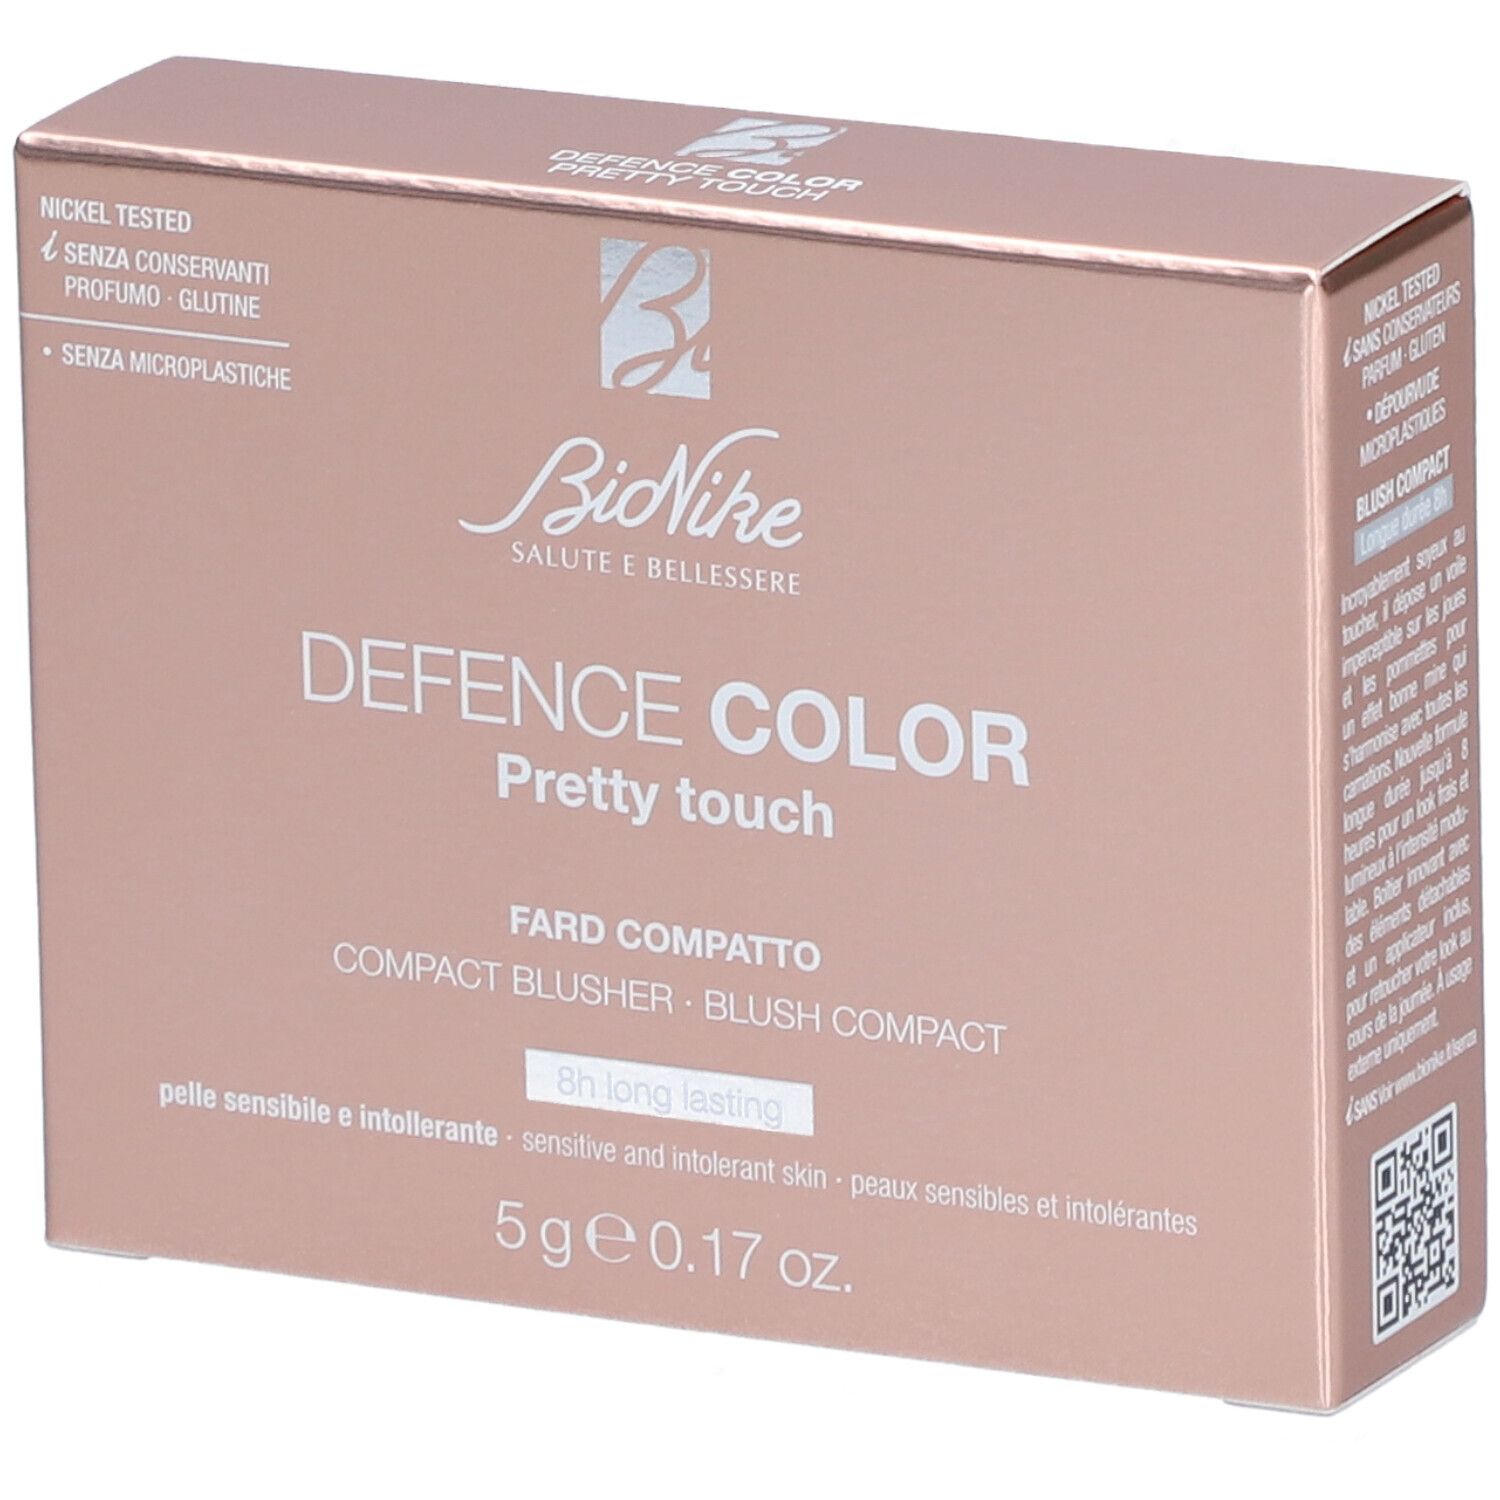 BioNike Defence Color Pretty Touch Compact Blusher 302 Peche